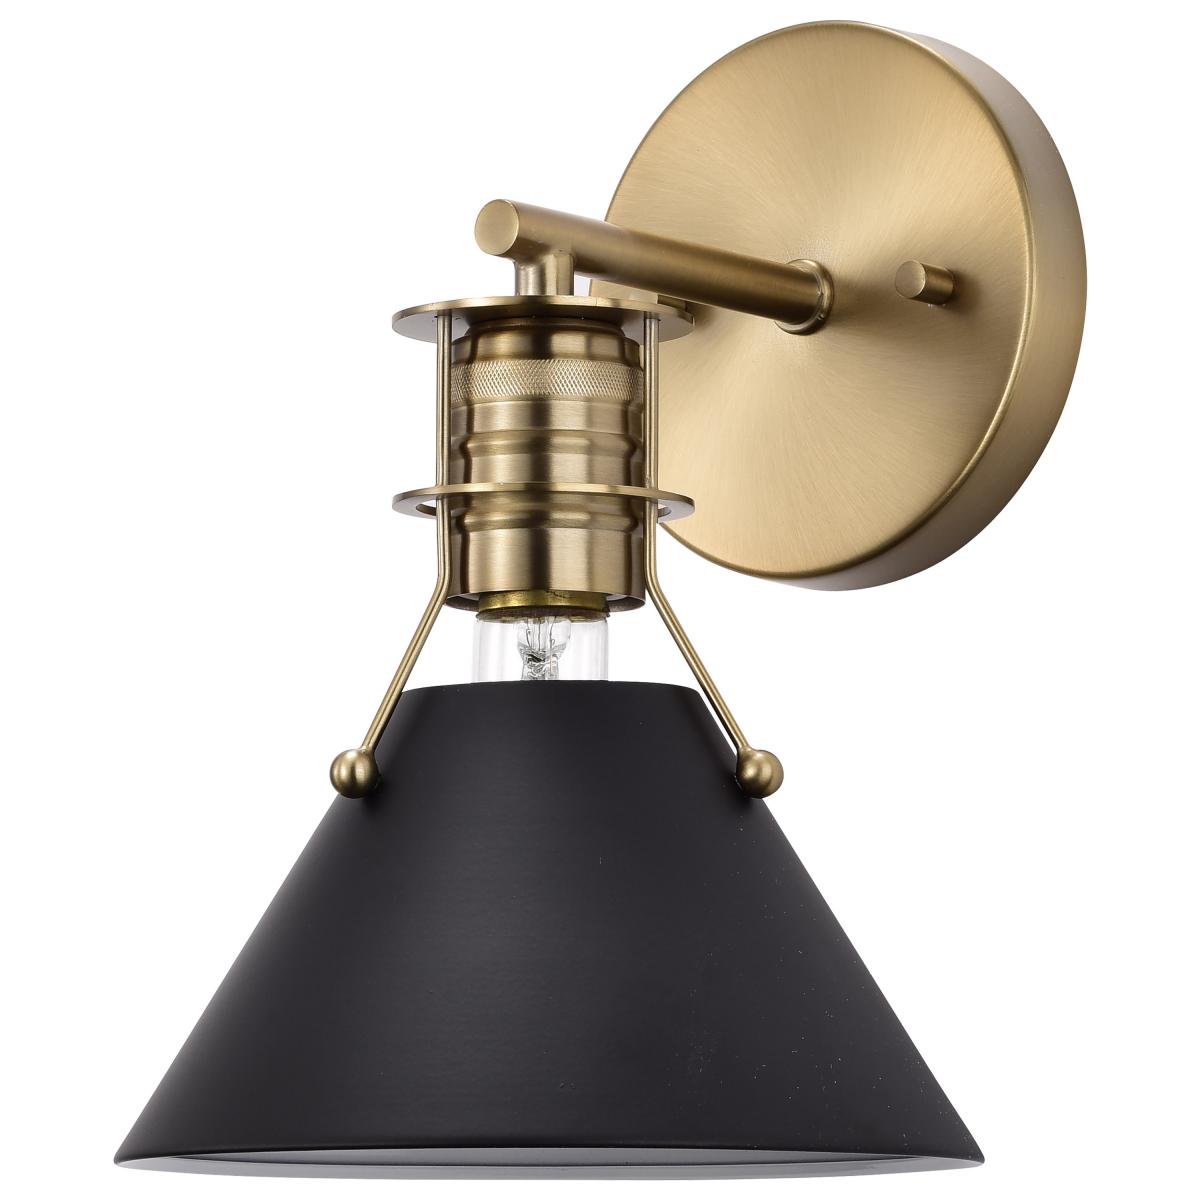 60-7519 OUTPOST 1 LIGHT WALL SCONCE